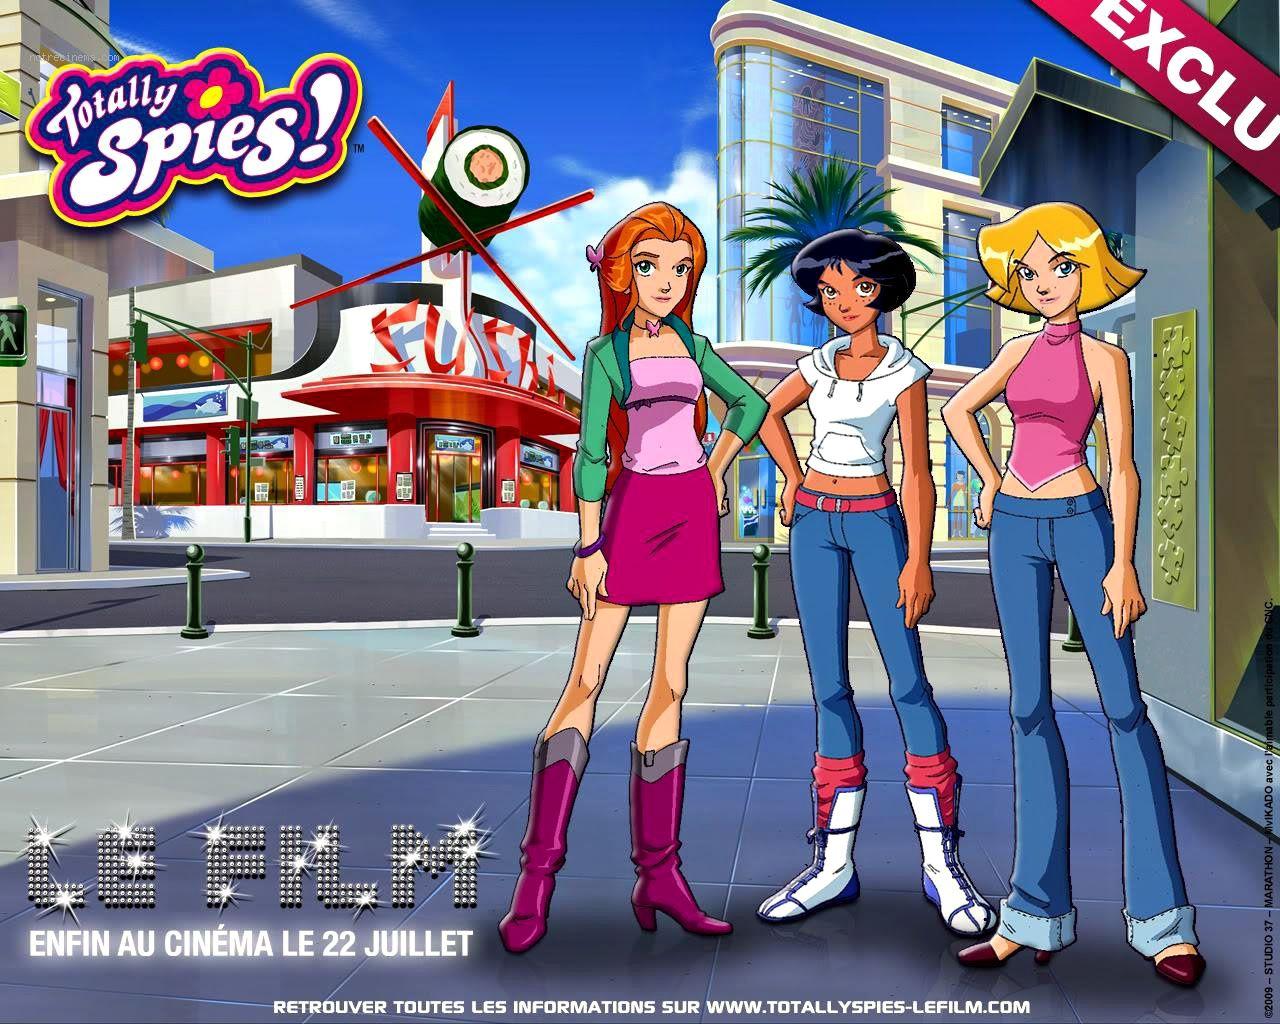 Totally Spies ! Le Film. Cartoons Animation. Totally